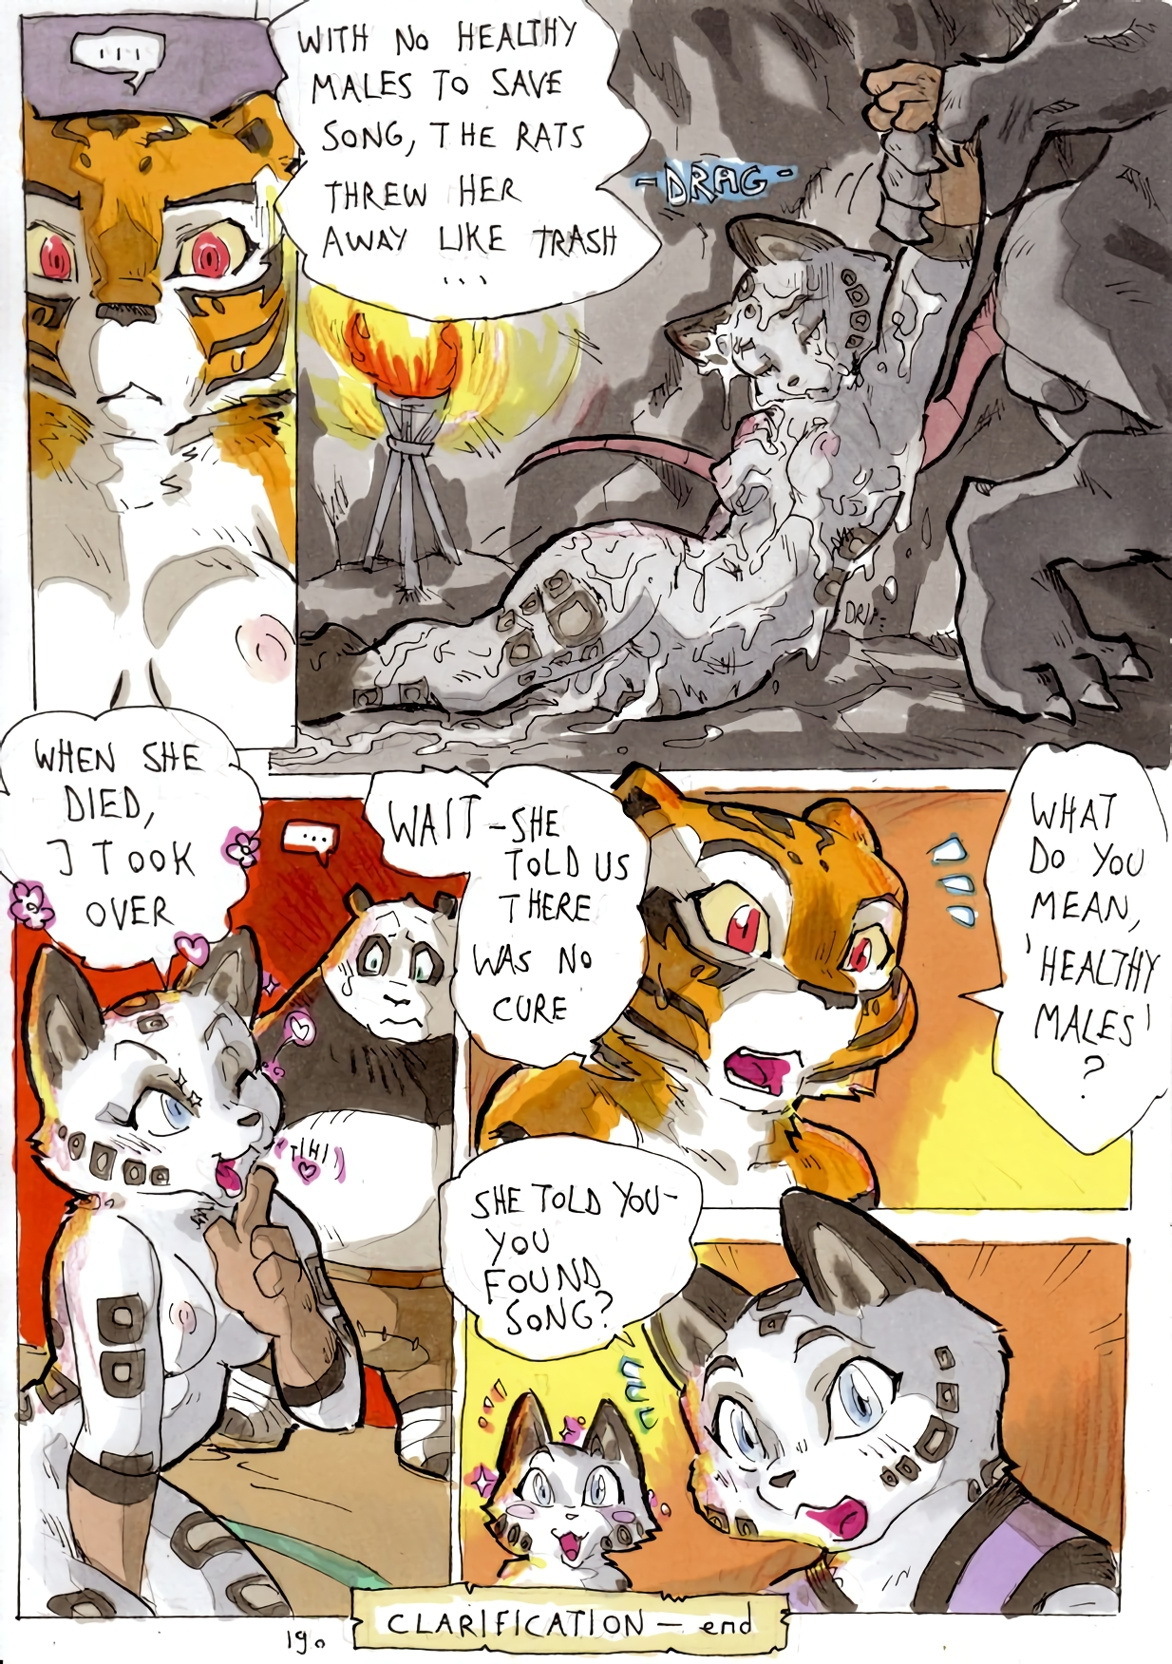 Better Late than Never 2 - Page 45